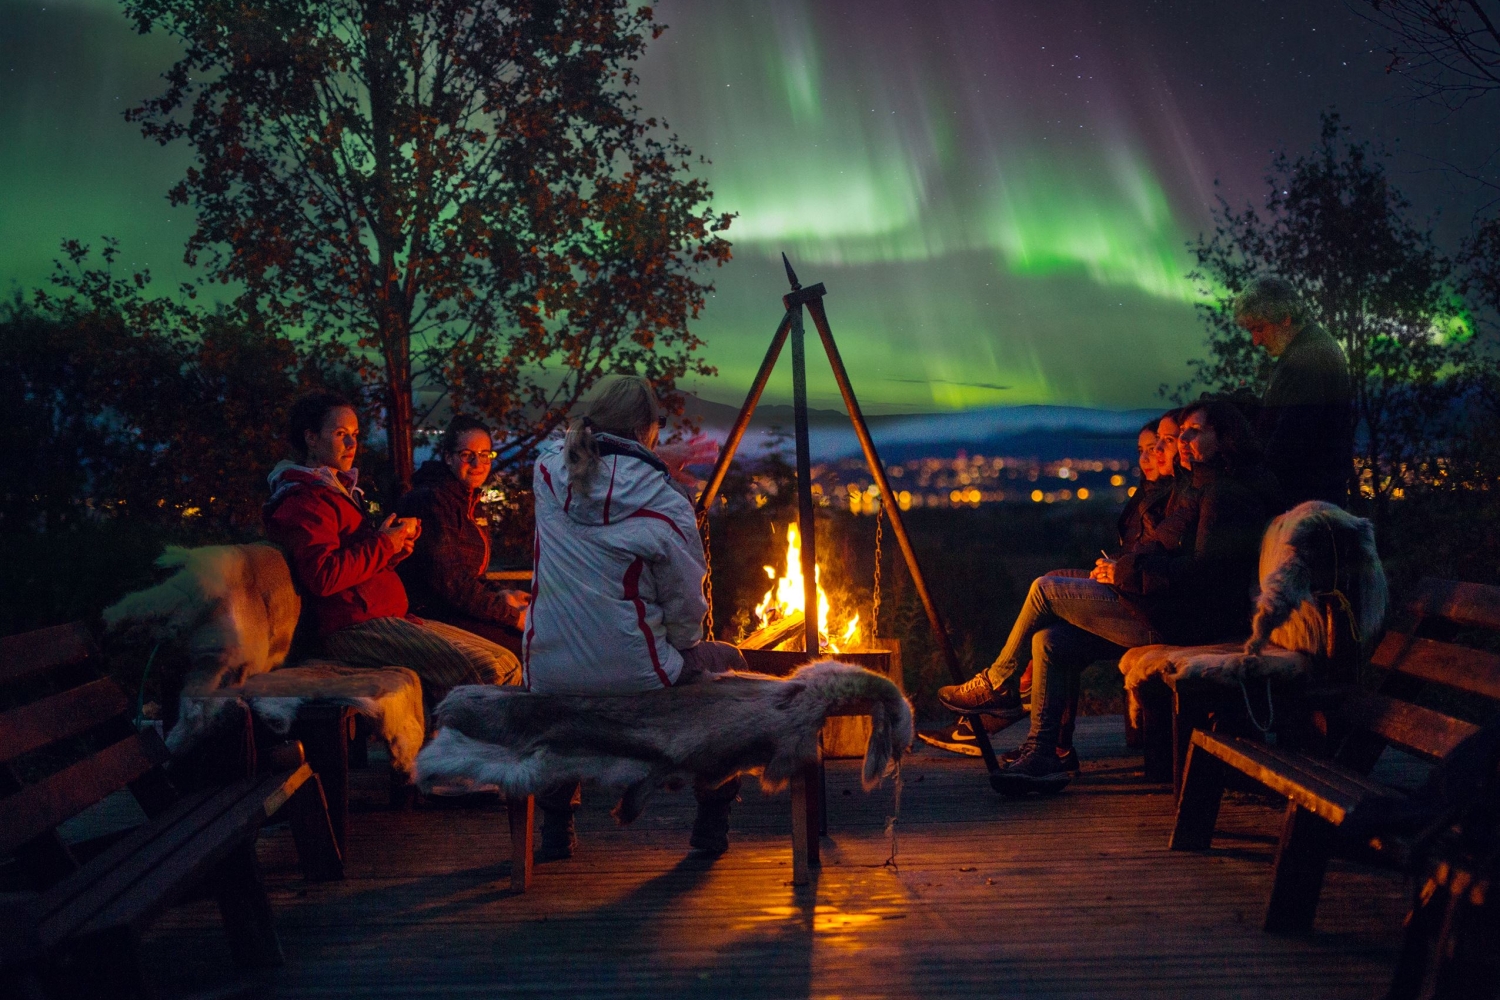 Guests gathered arount the bonfire, watching the Northern Lights